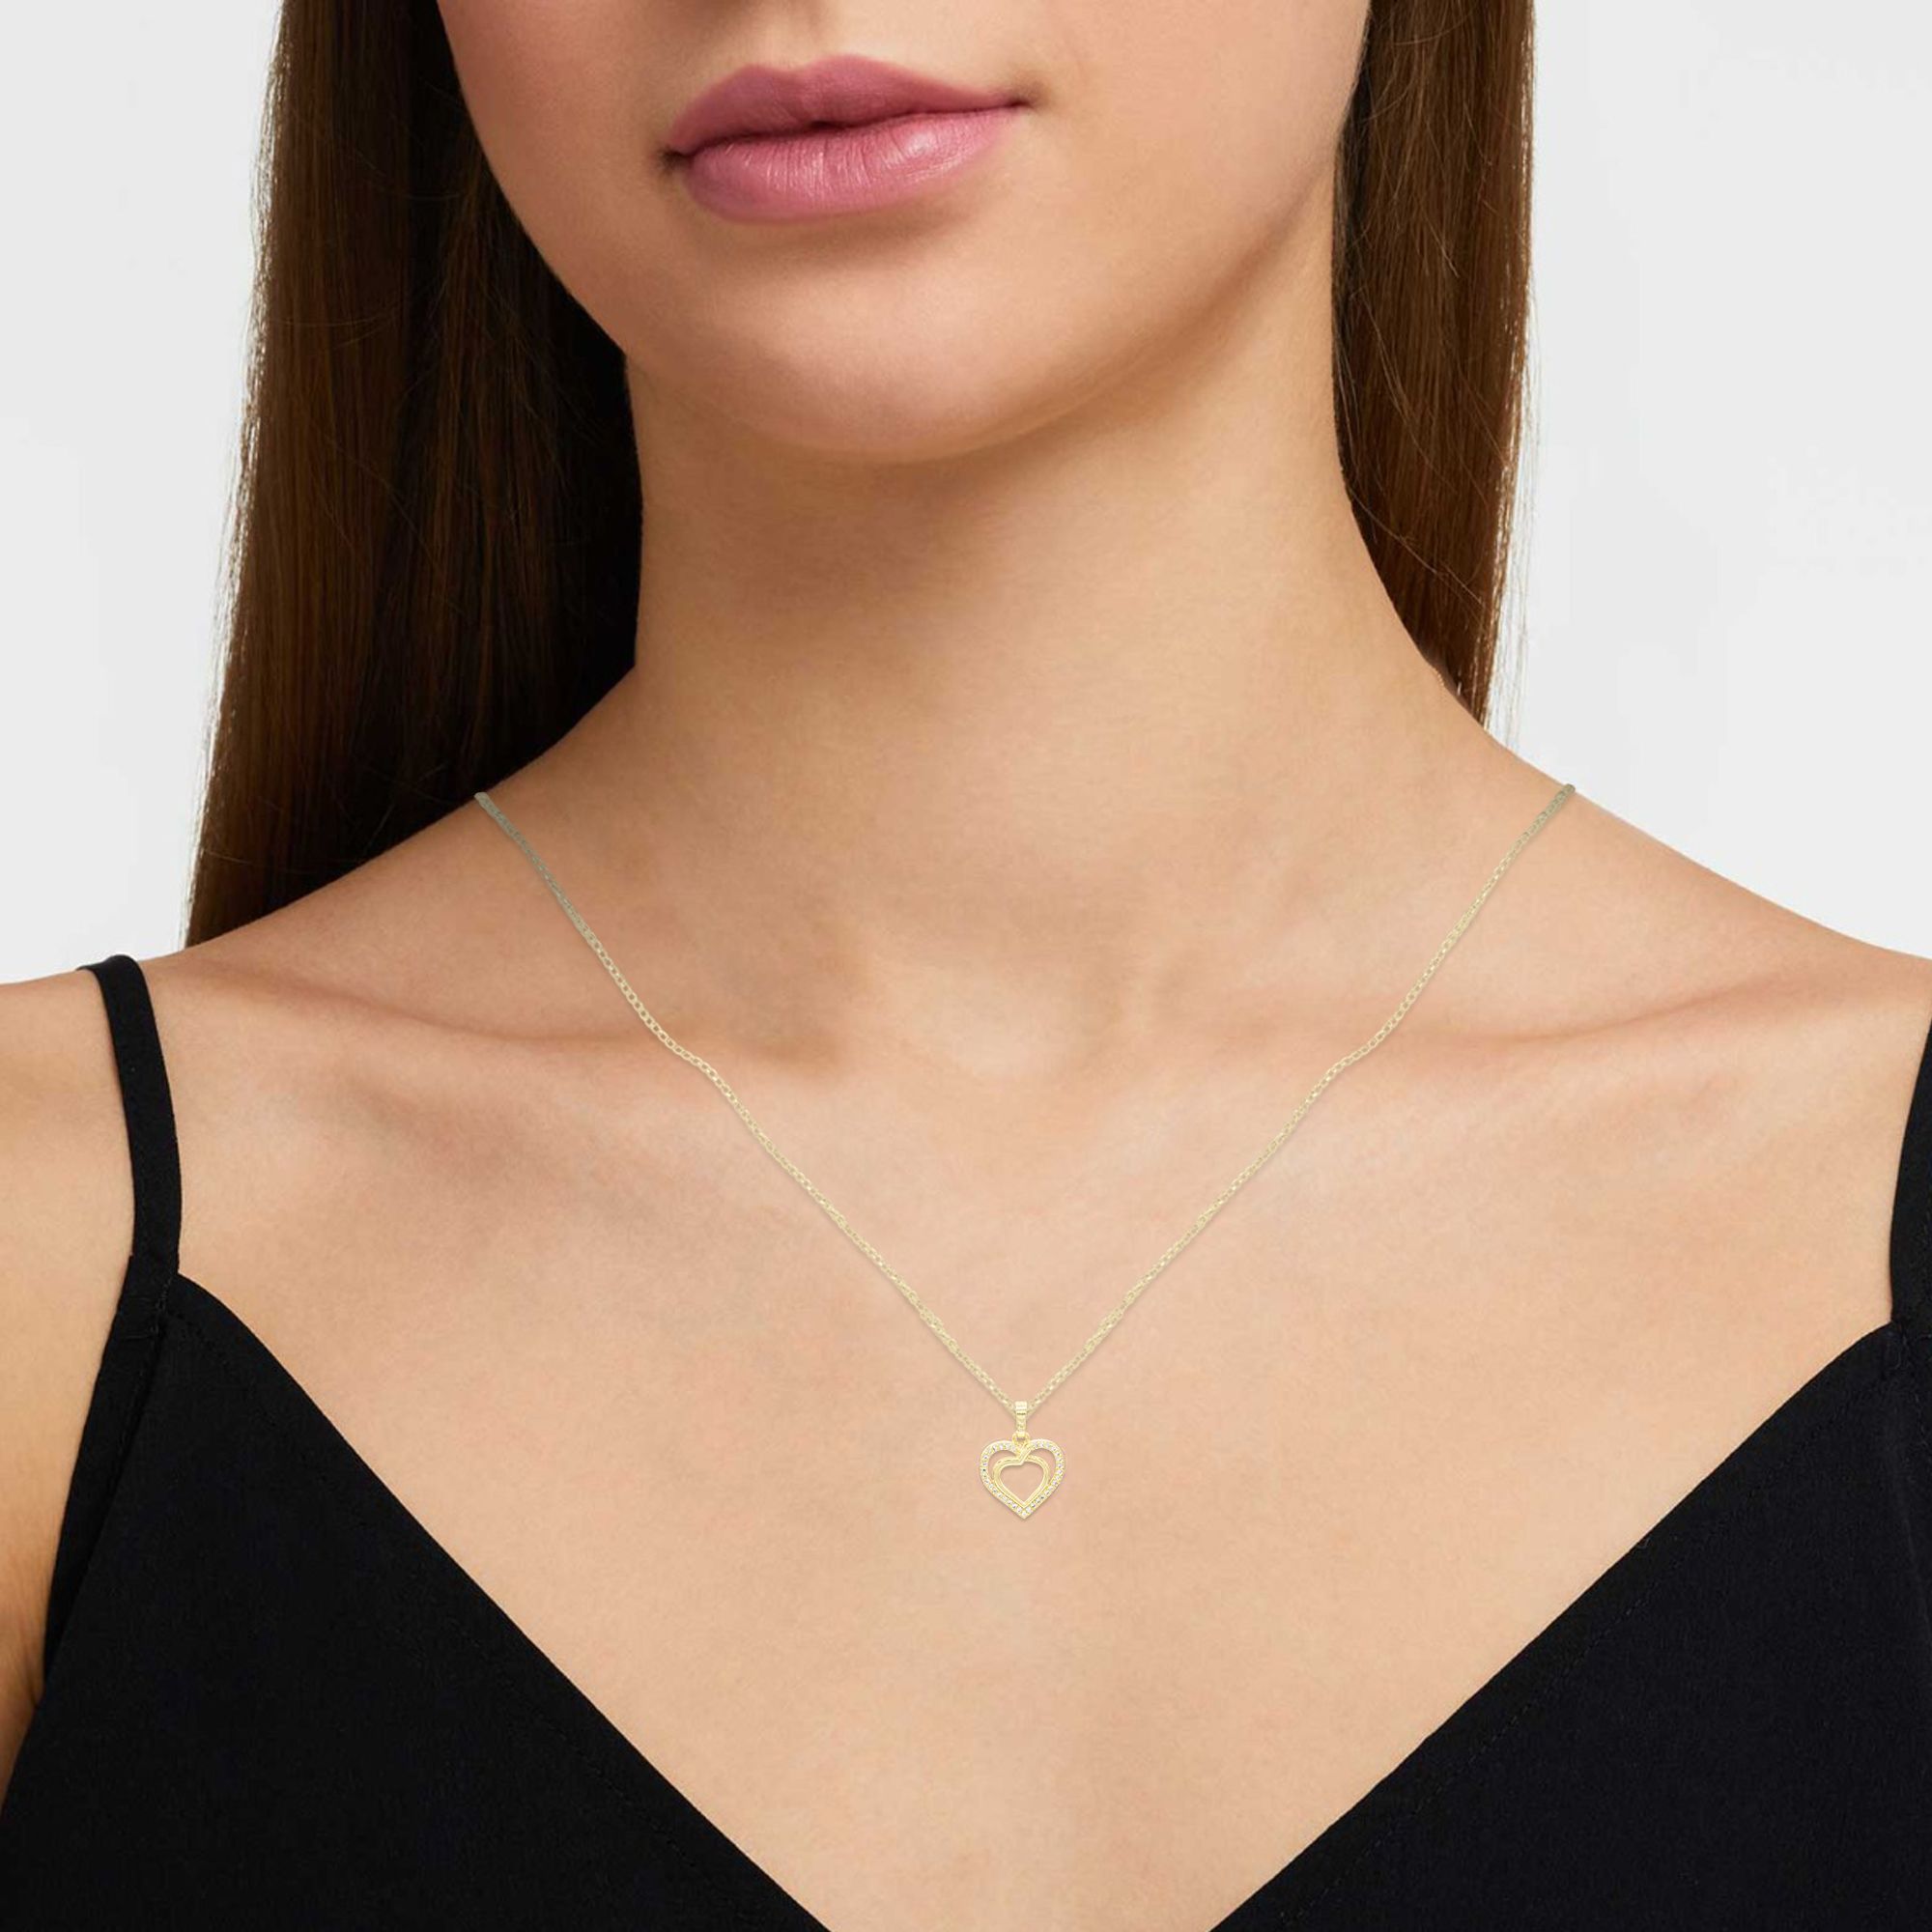 Cubic Zirconia 14K Gold Filled Twofold Heart Pendant Necklace Set